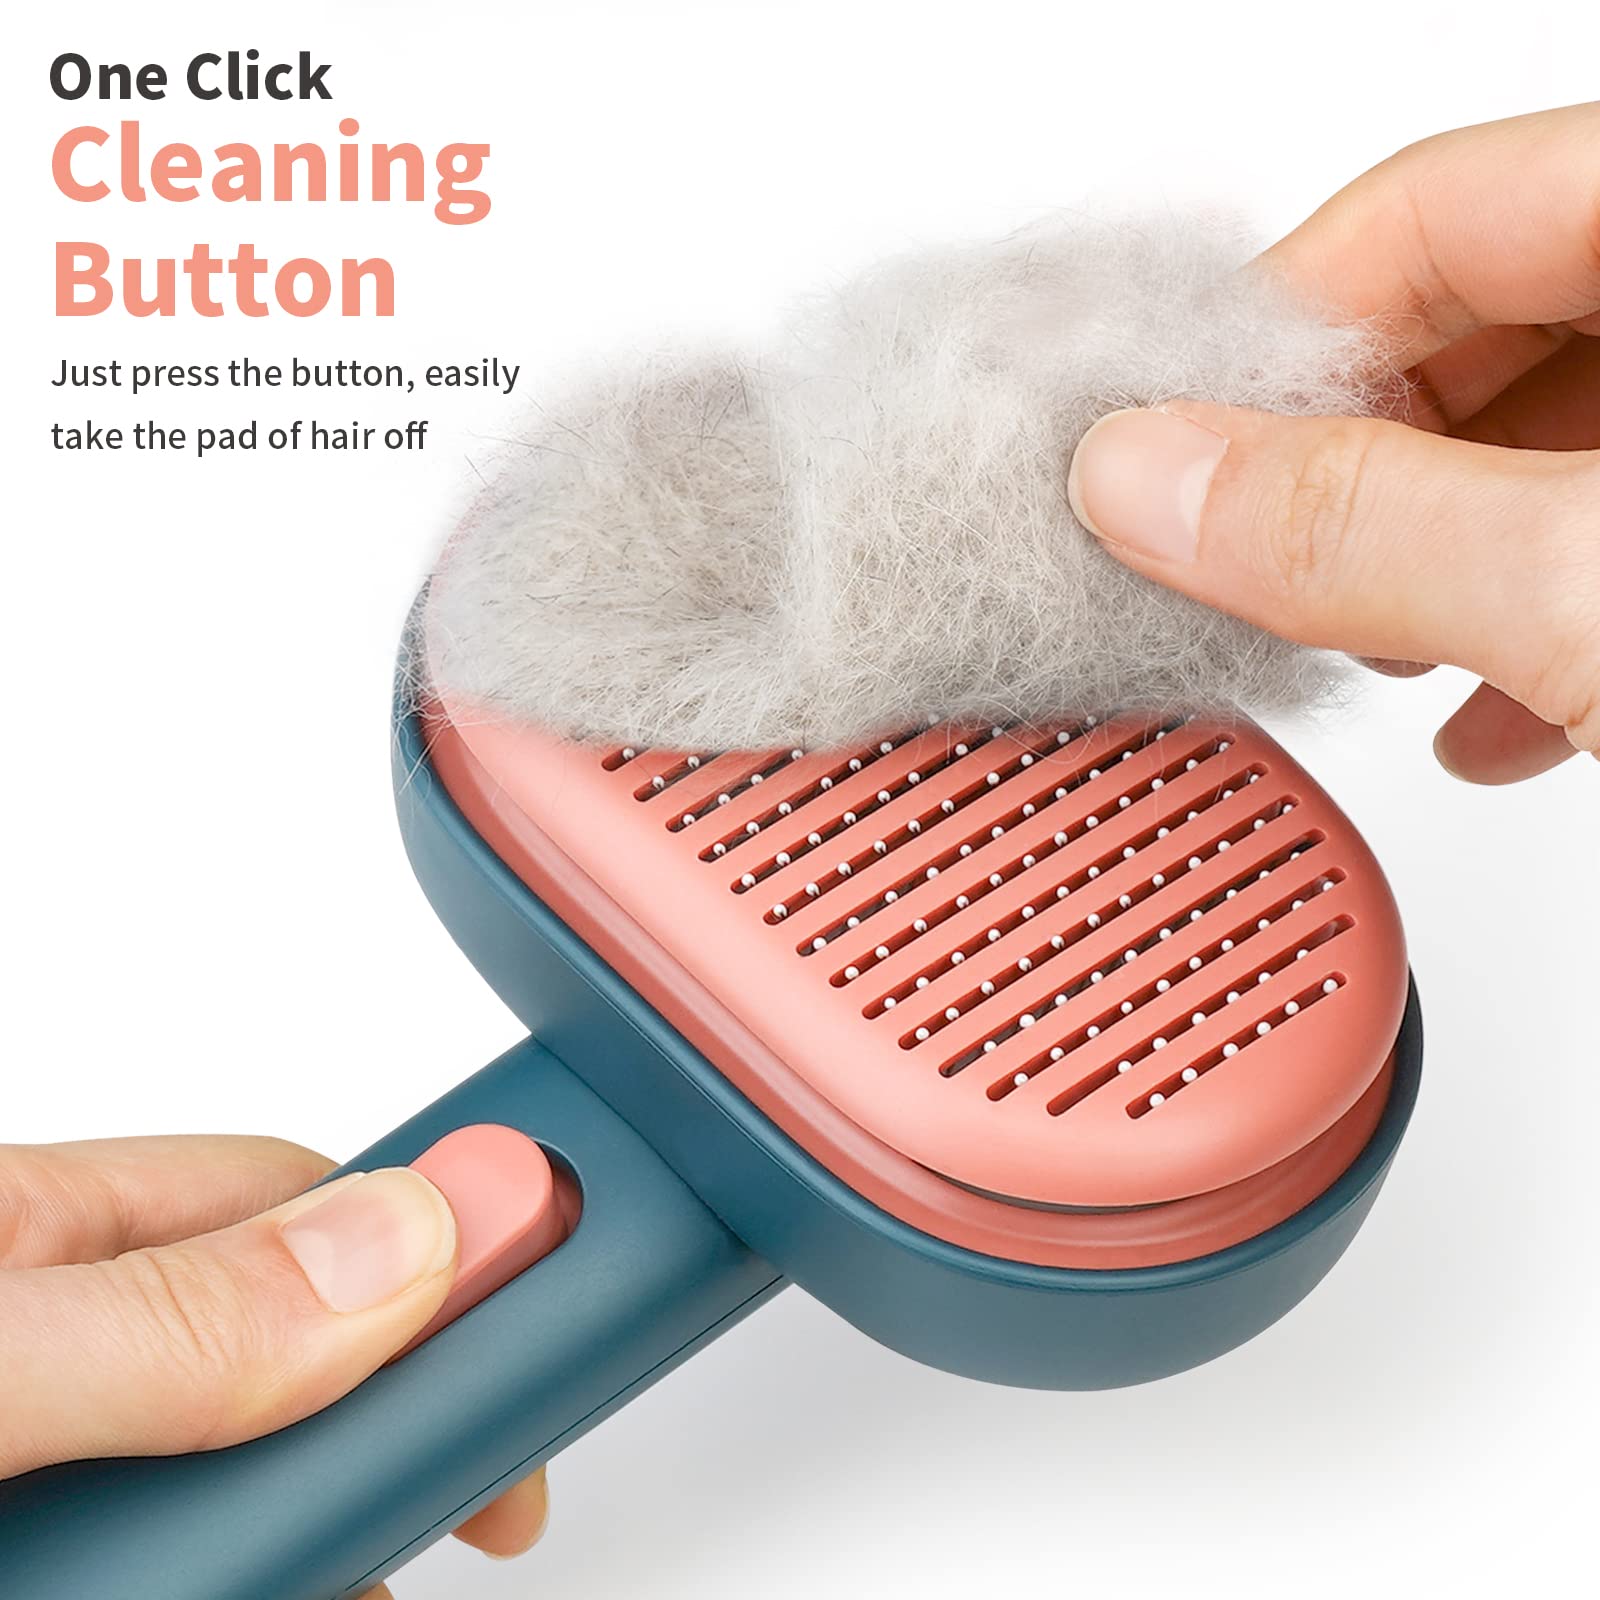 aumuca cat Brush with Release Button, cat Brushes for Indoor cats Shedding, cat Brush for Long or Short Haired cats, cat groomin